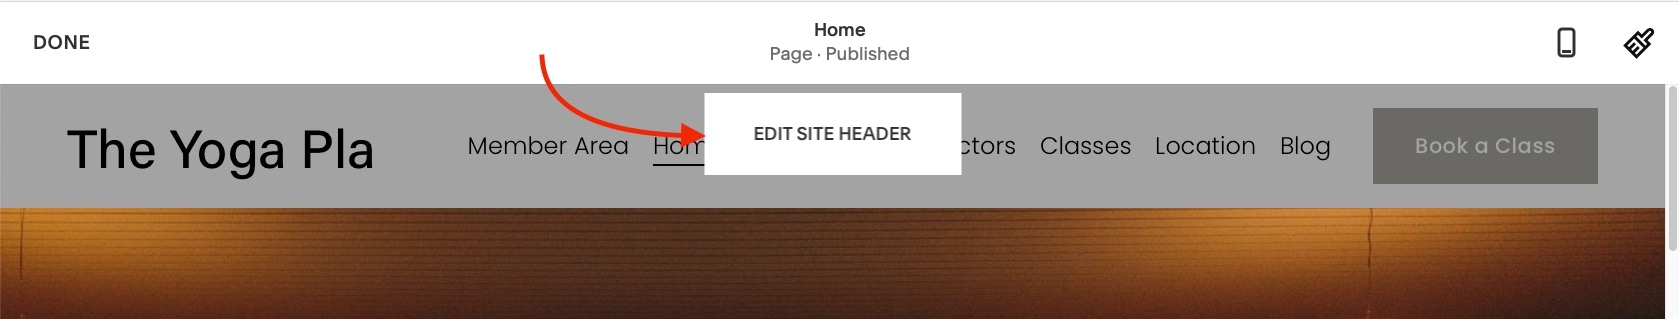 Accessing the header options in the Squarespace tutorial